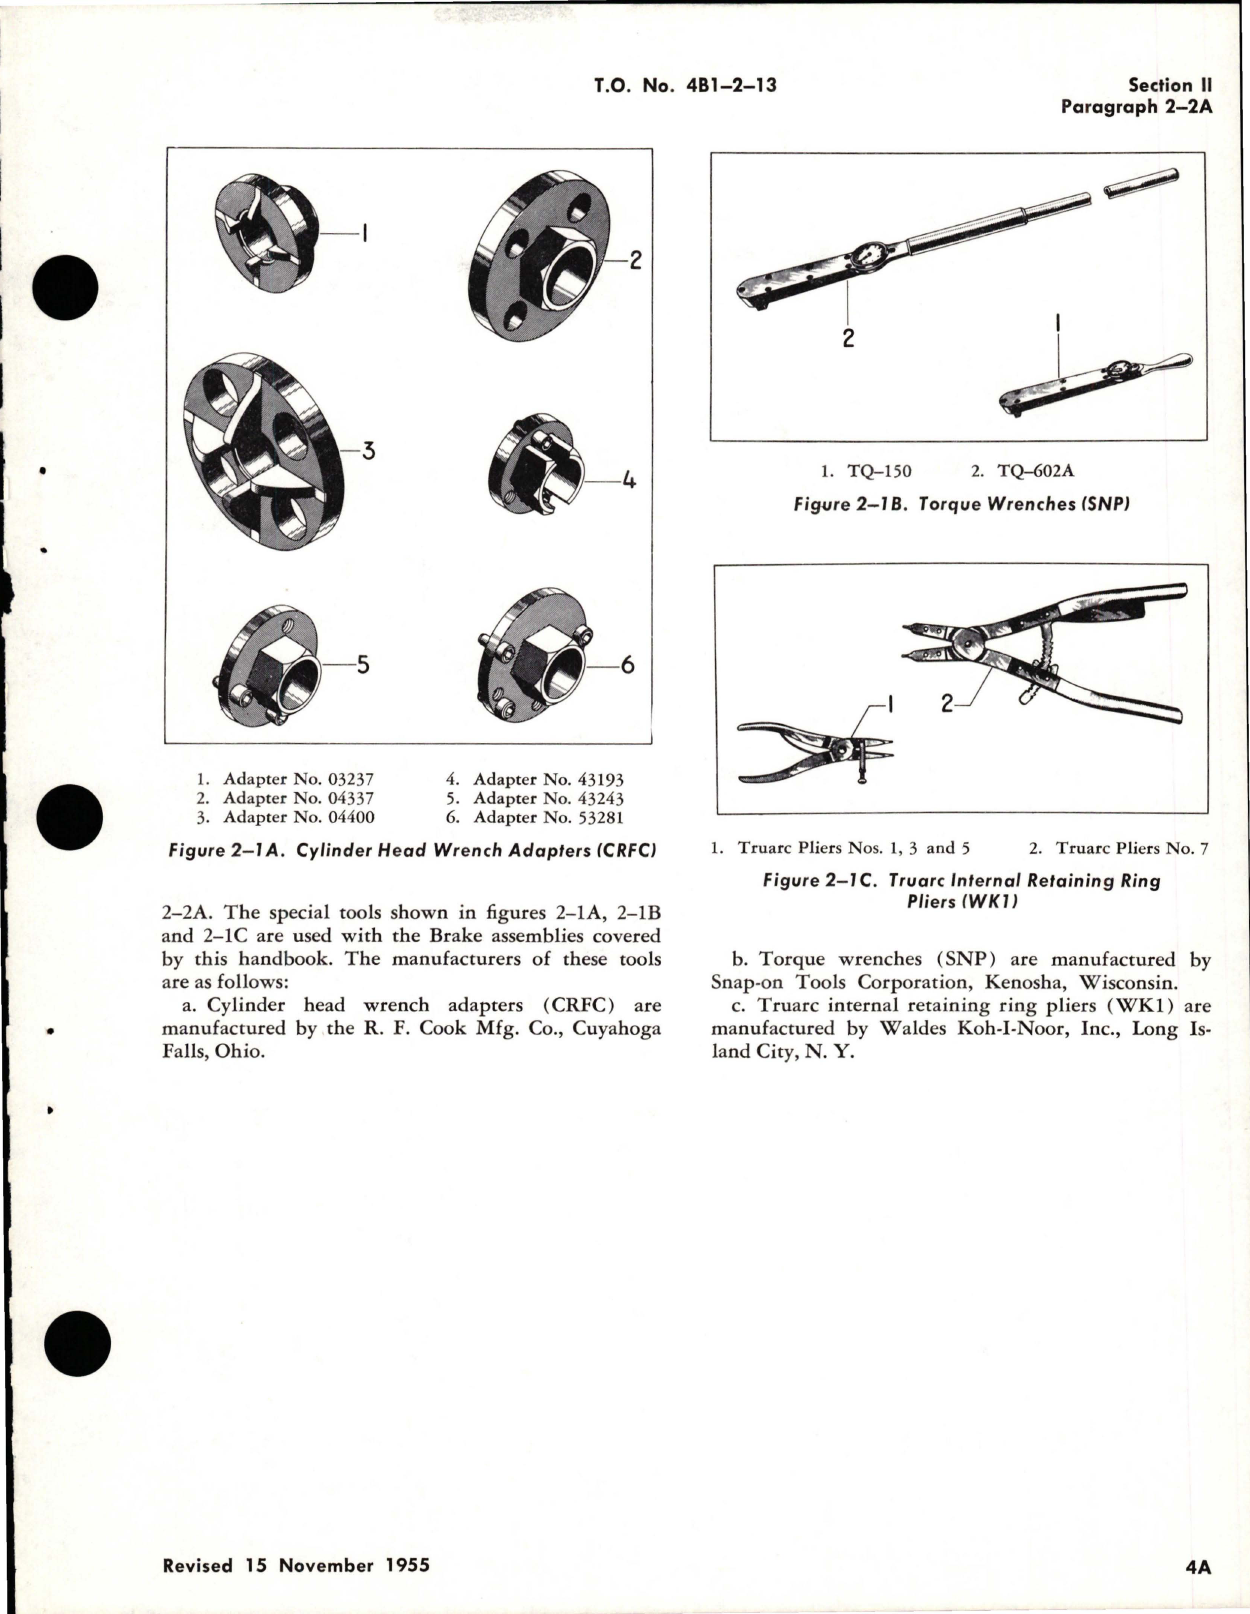 Sample page 9 from AirCorps Library document: Overhaul Instructions for Single and Dual Disc Brakes